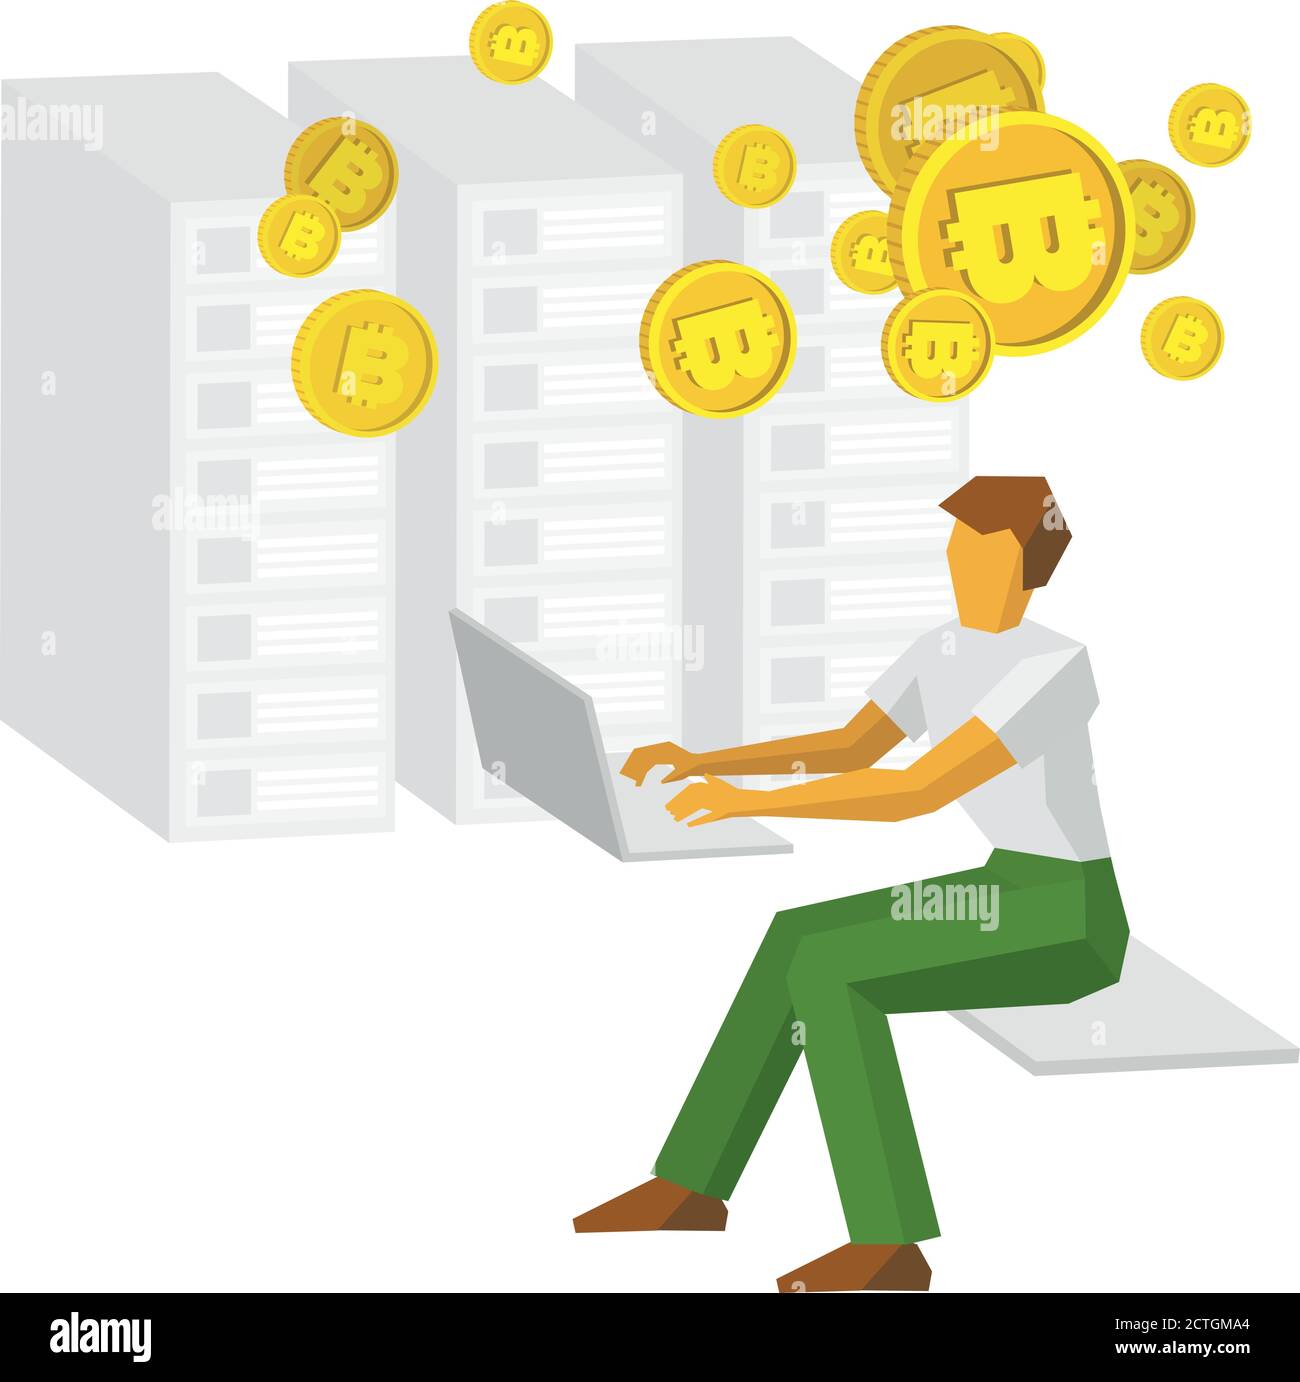 Man working on a computer and mining bitcoins. Mainframes (servers) at the back. Business concept - cryptocurrency, profit growth, easy money. Flat st Stock Vector